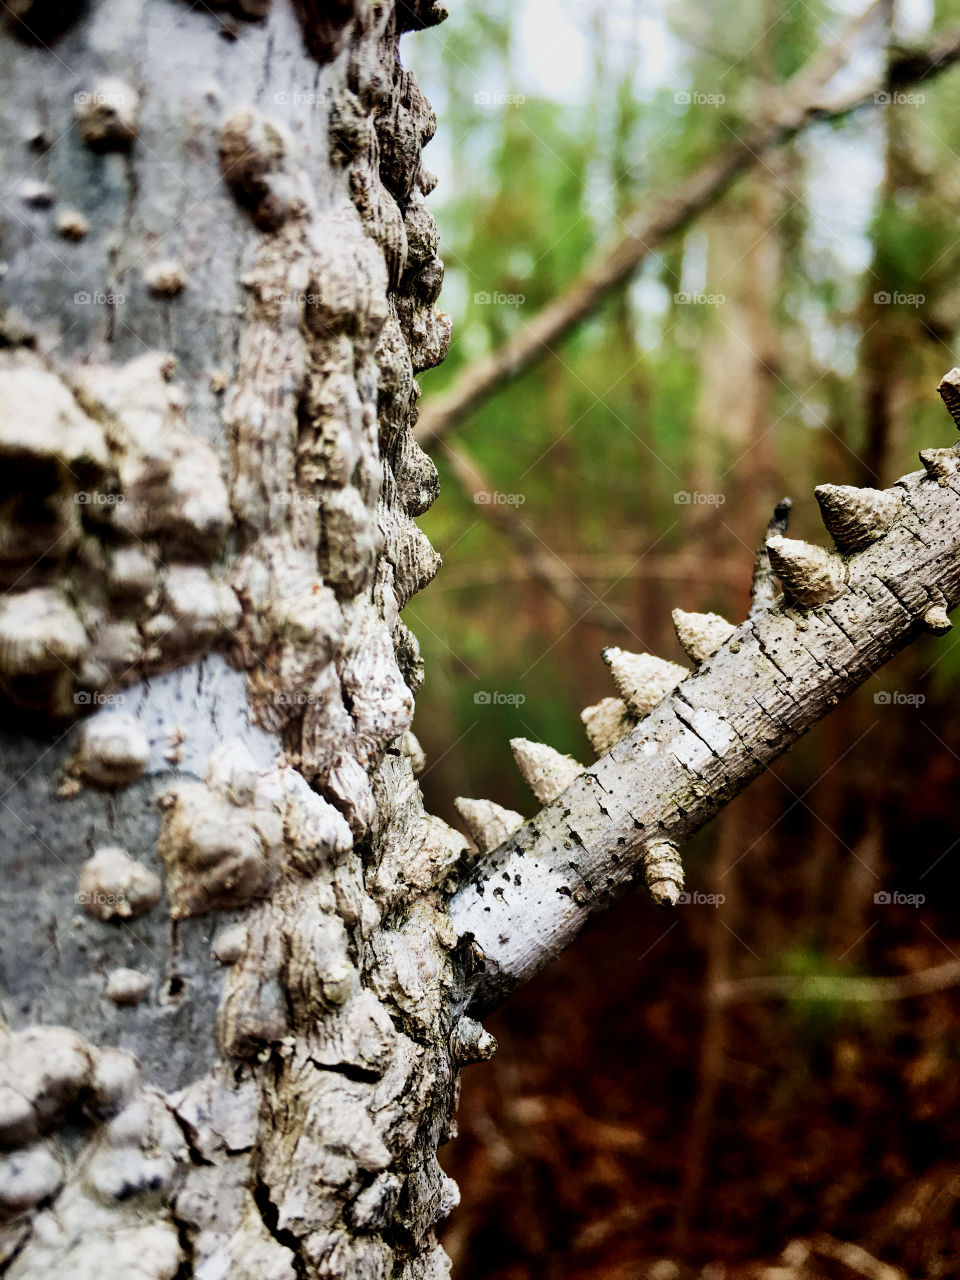 Macro reveals the rich organic texture of the warty spiky bark of a young sugarberry or southern hackberry tree 